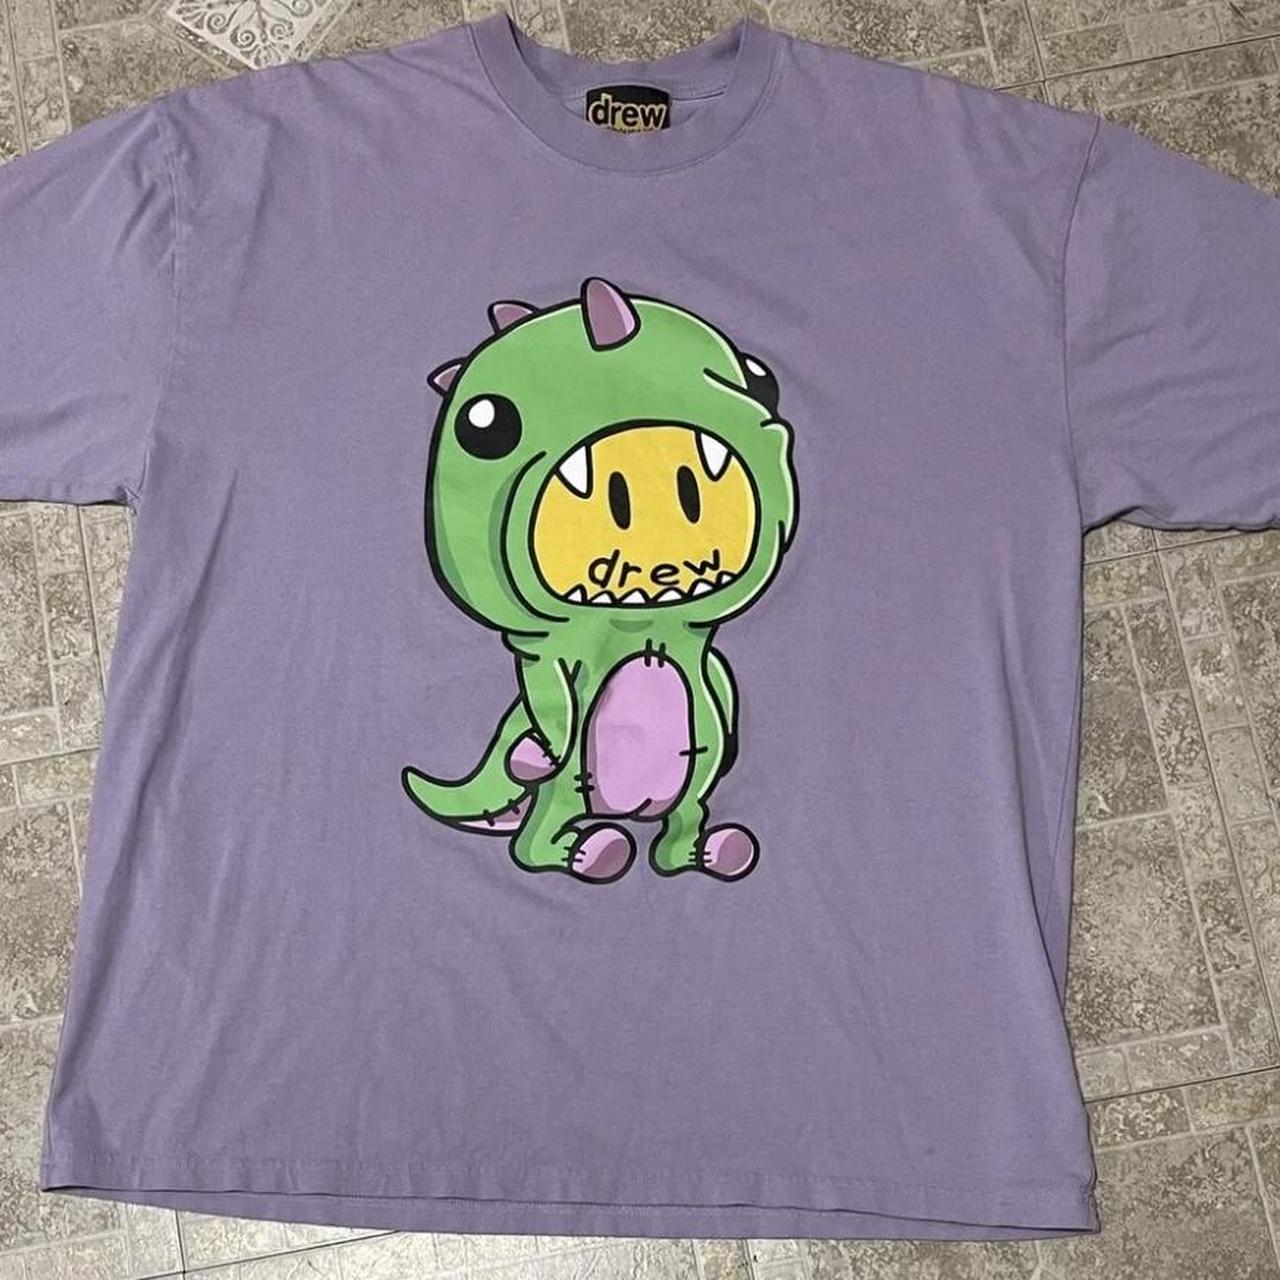 Drew House Dino SS Tee Shirt Lavender Size Large